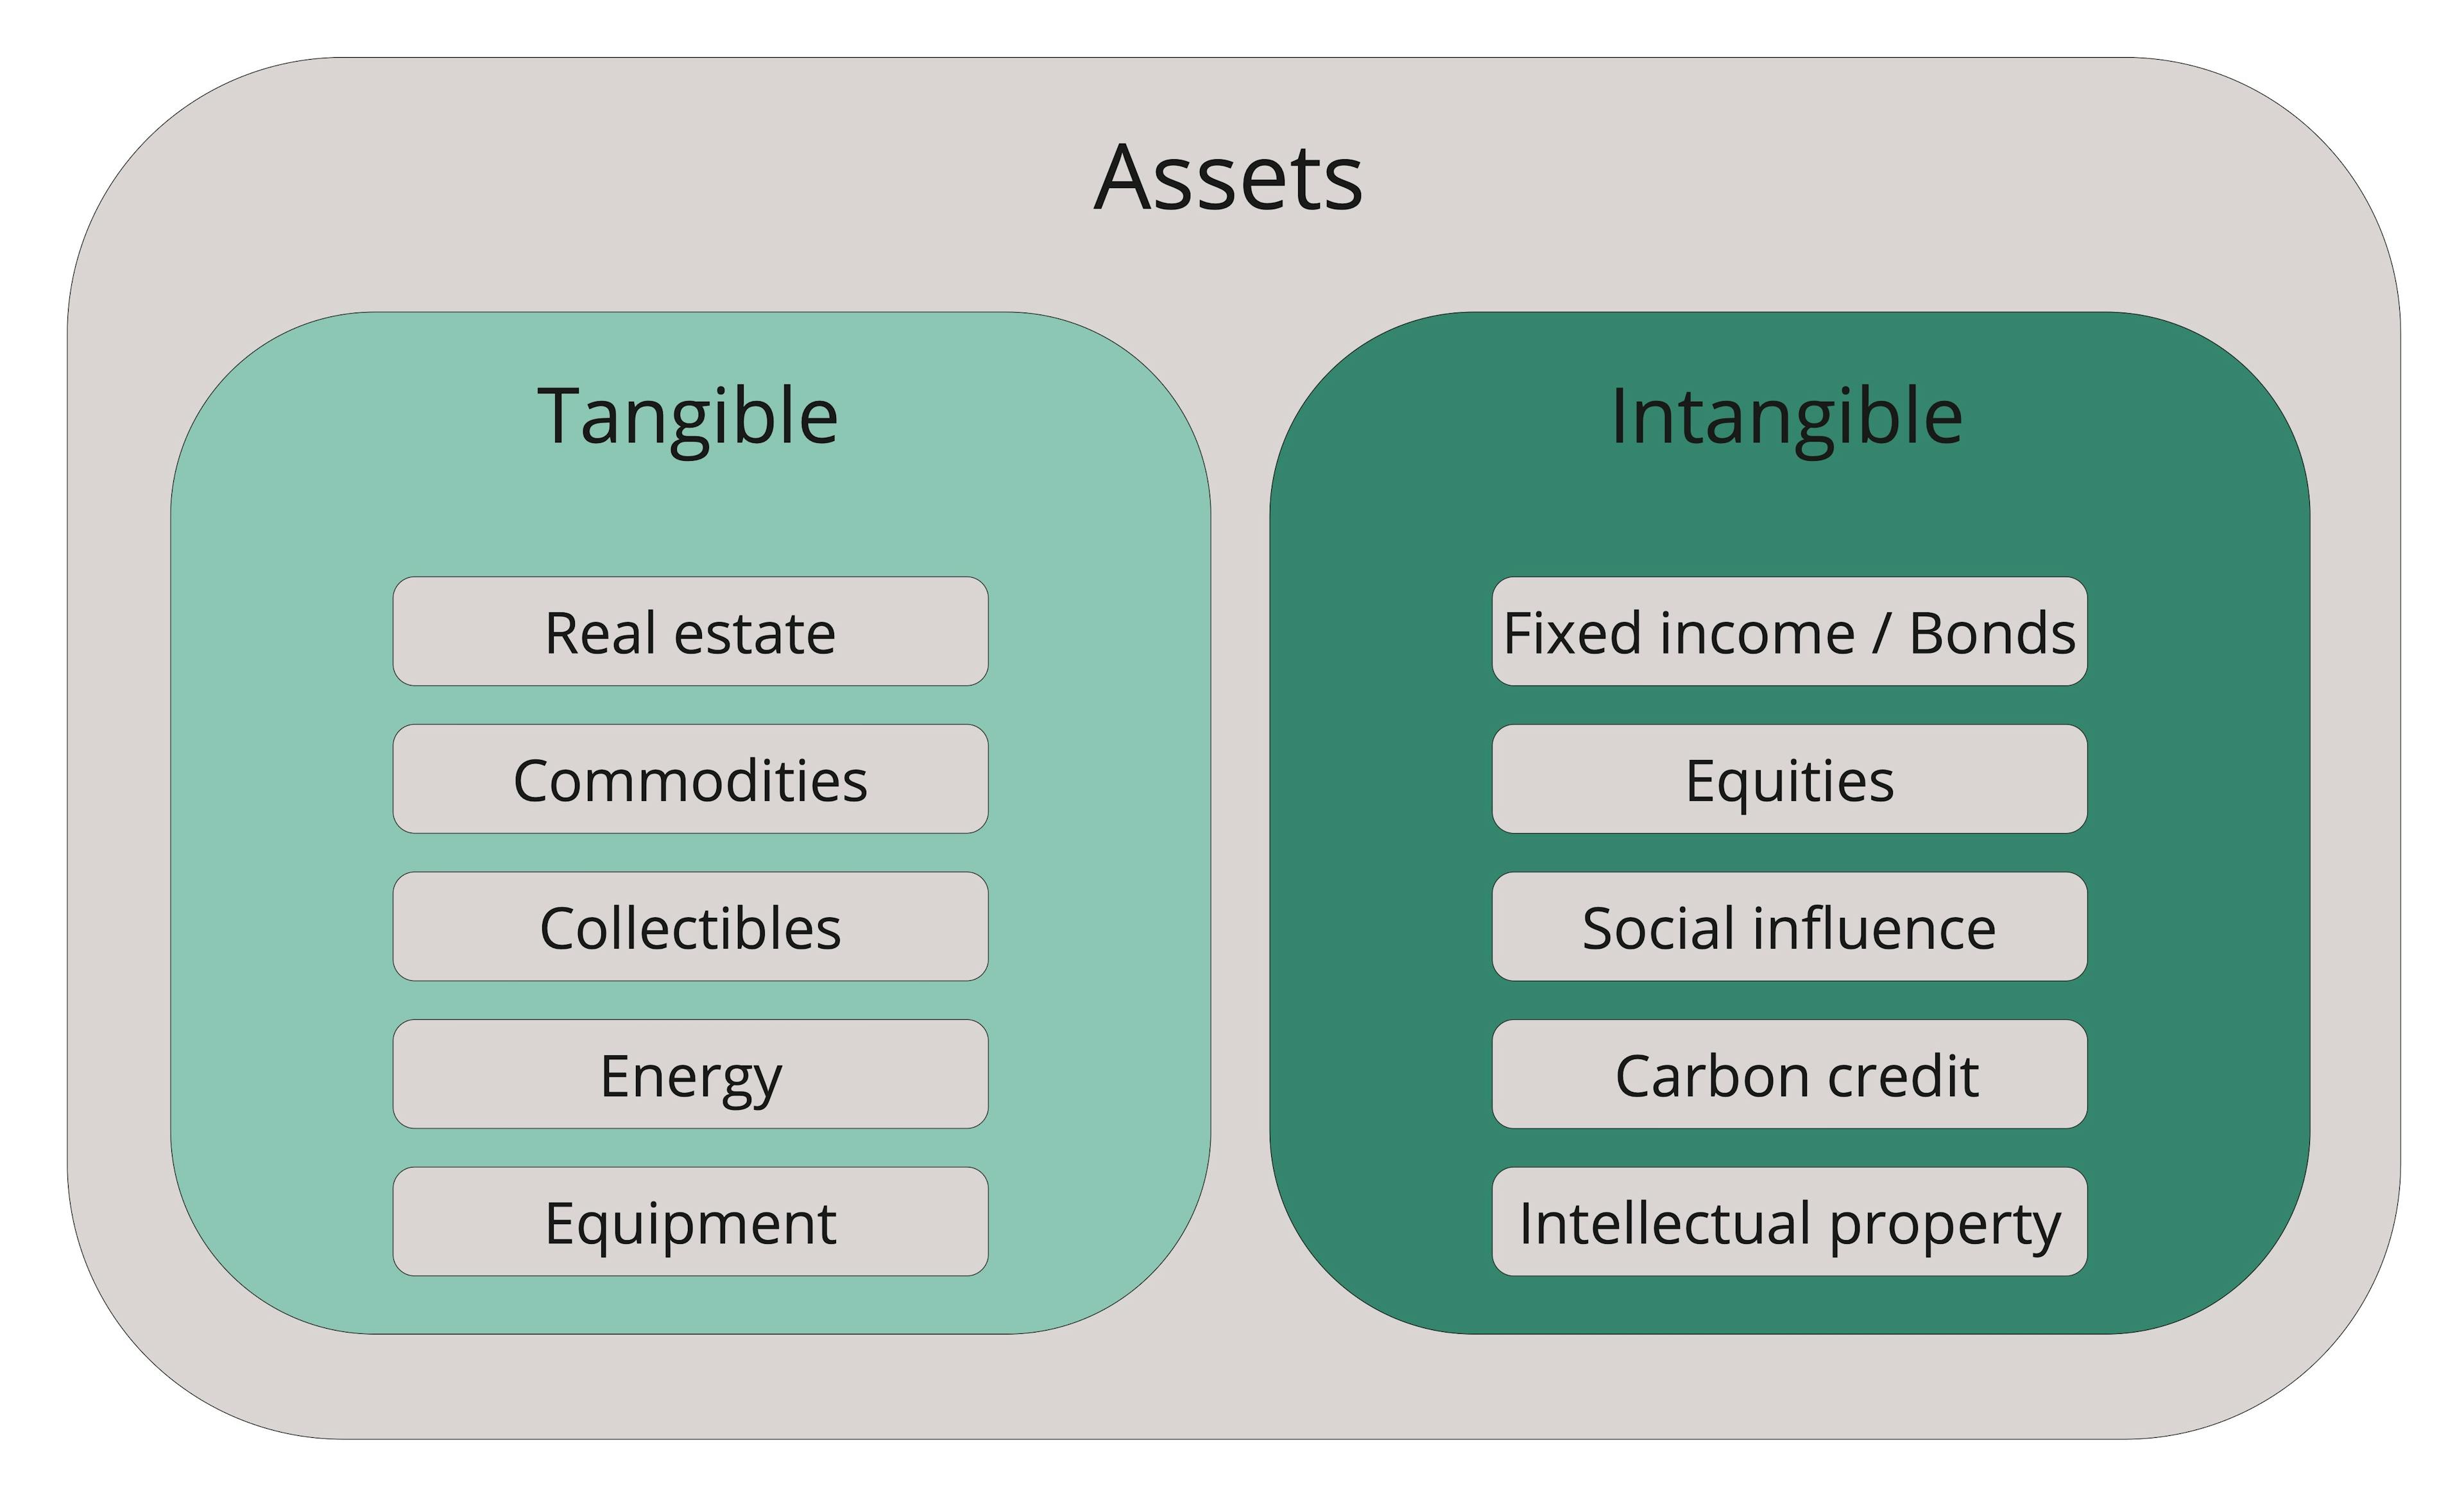 Tangible and intangible assets